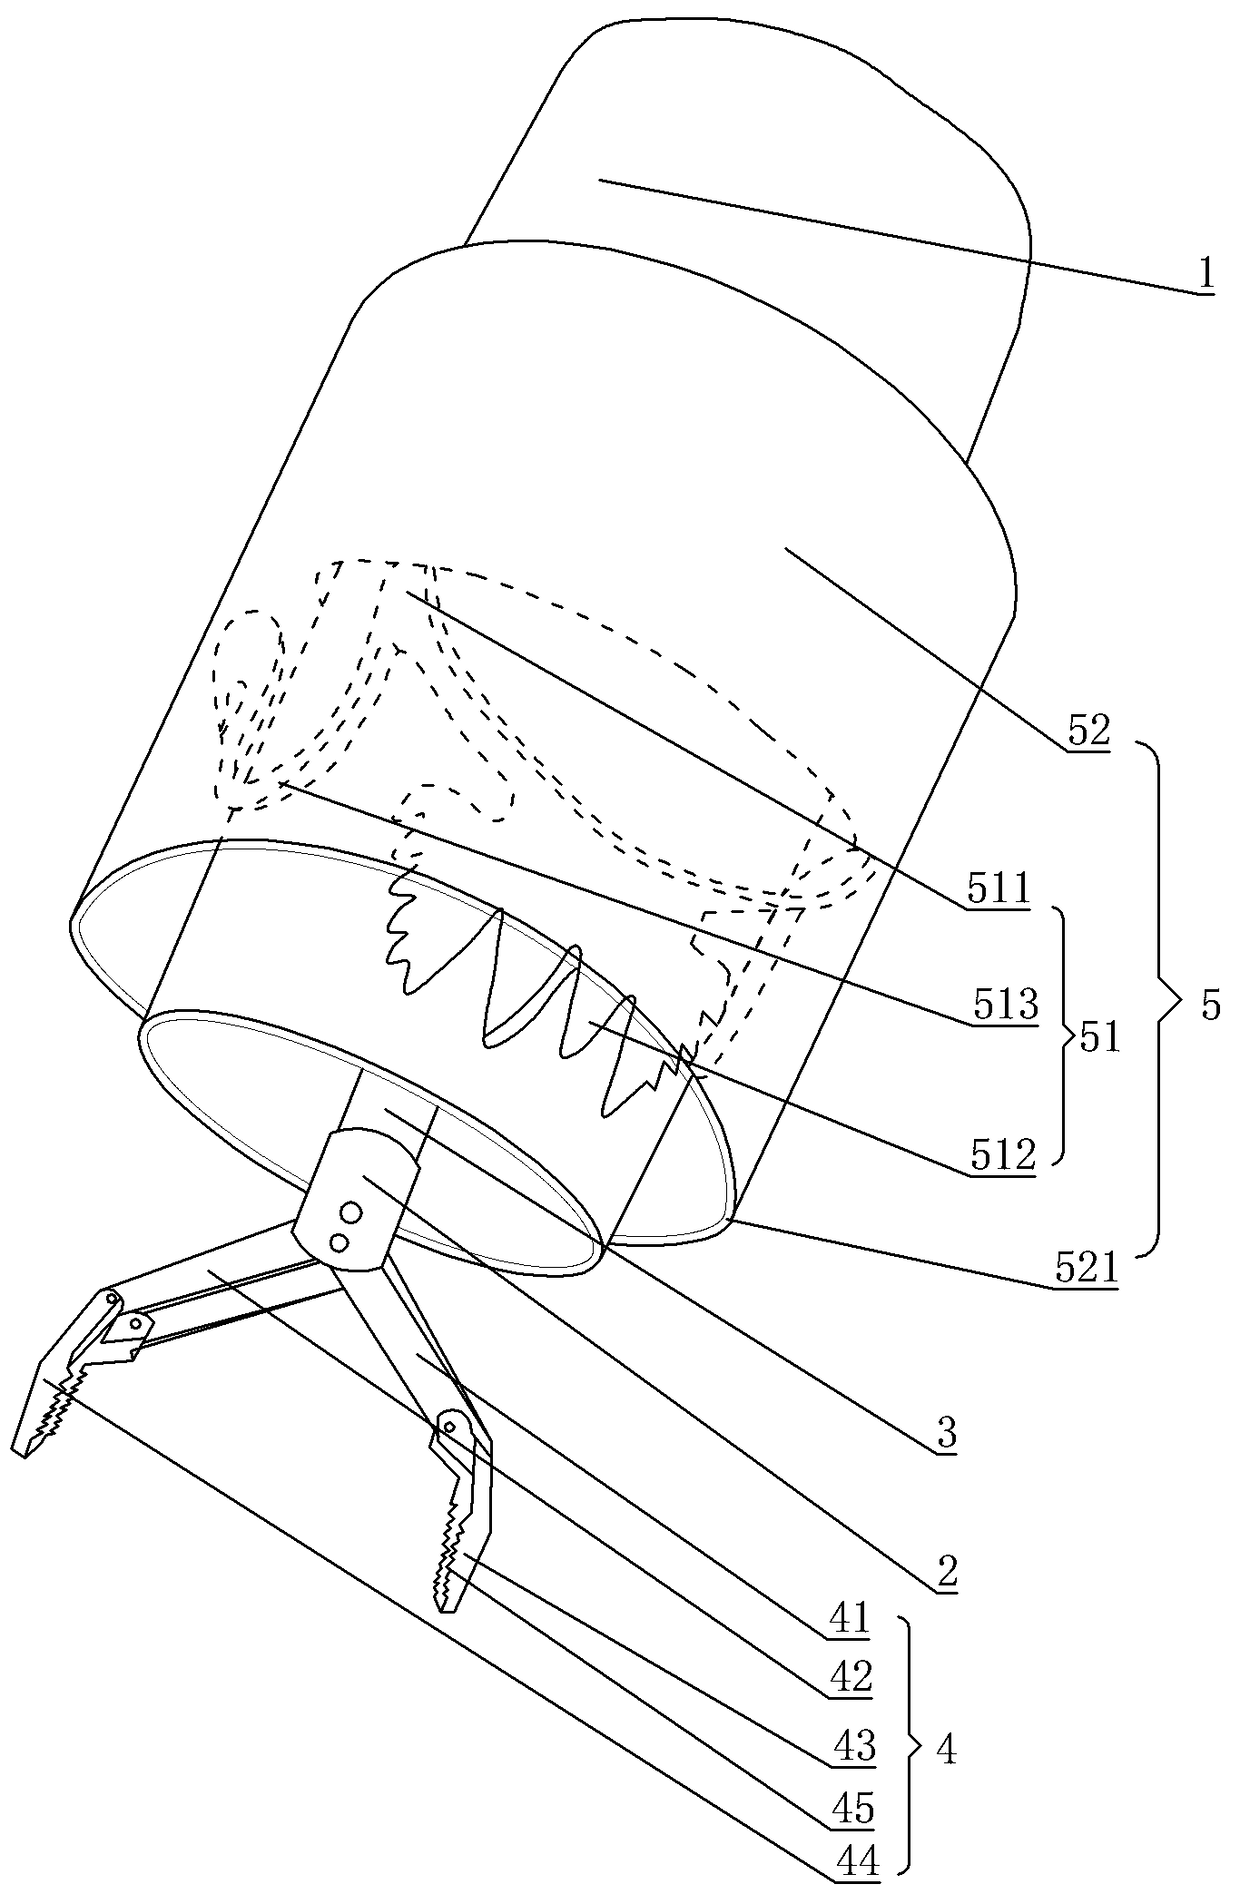 Full-thickness excising device